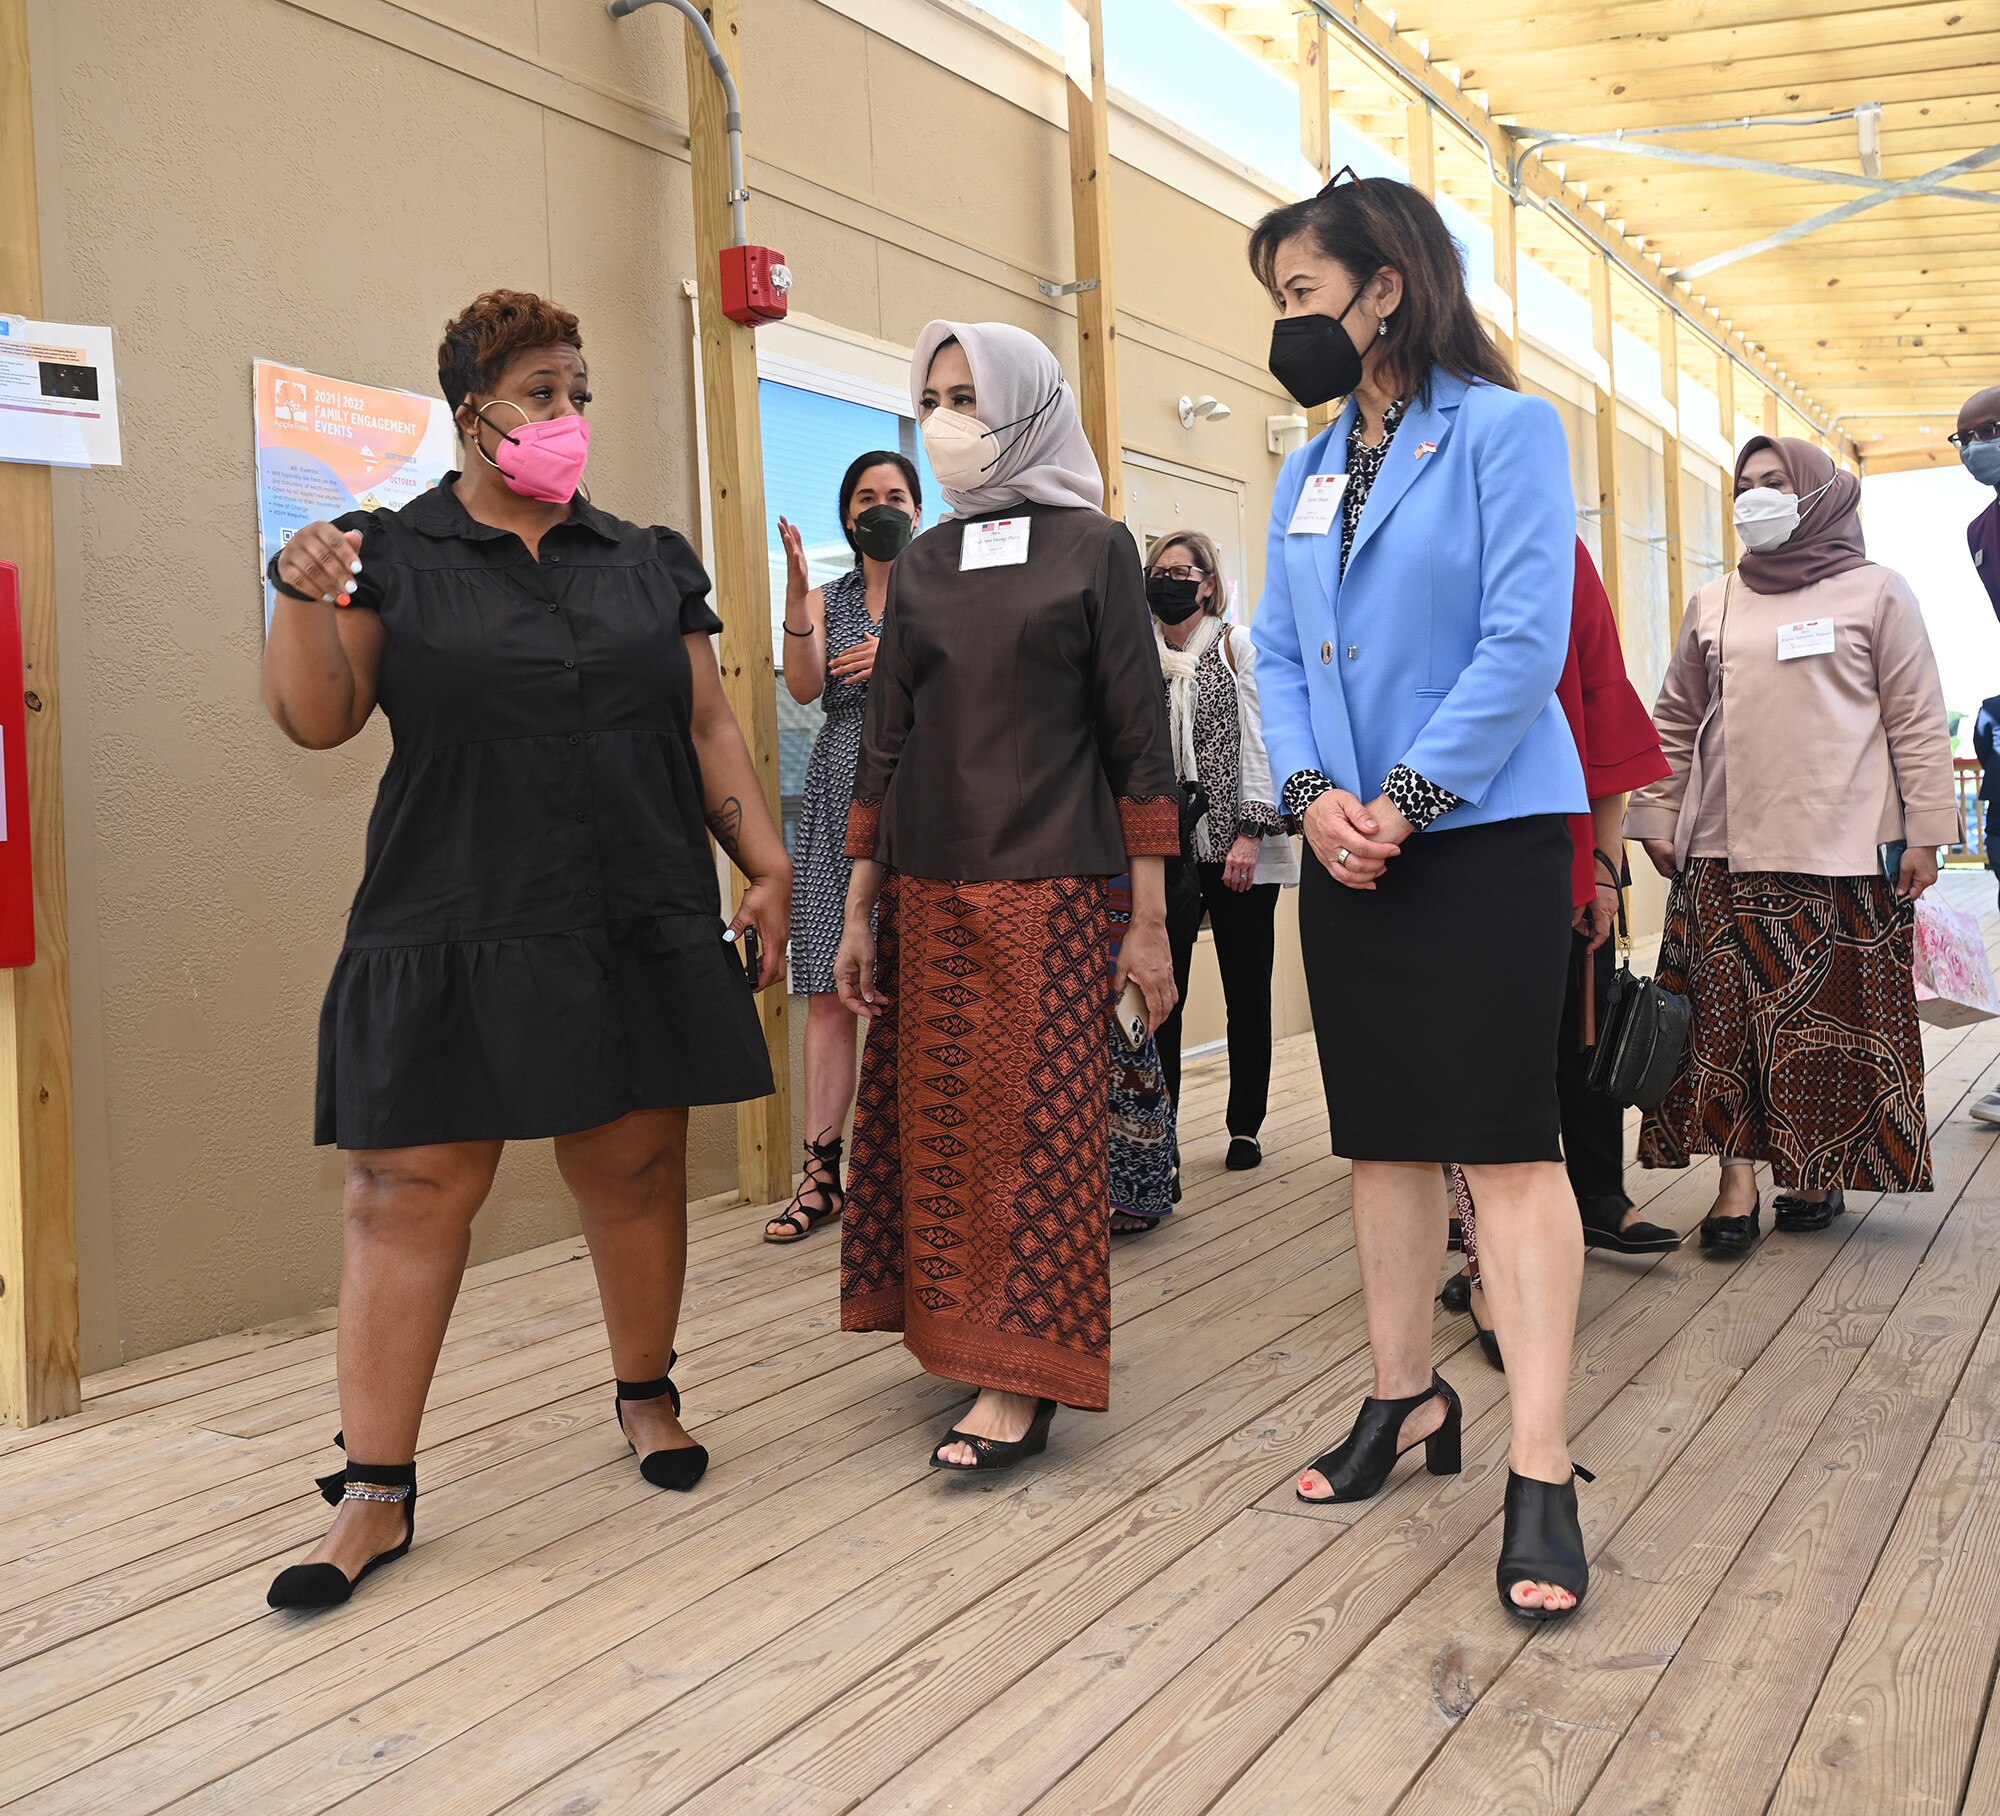 Wife of Air Force Chief of Staff Gen. Charles CQ Brown, Jr.,  Sharene Brown (right) tours a small school with visiting spouse of Indonesian  Air Chief Marshal Fadjar Prasetyo, Andarini Inong Putri (center).